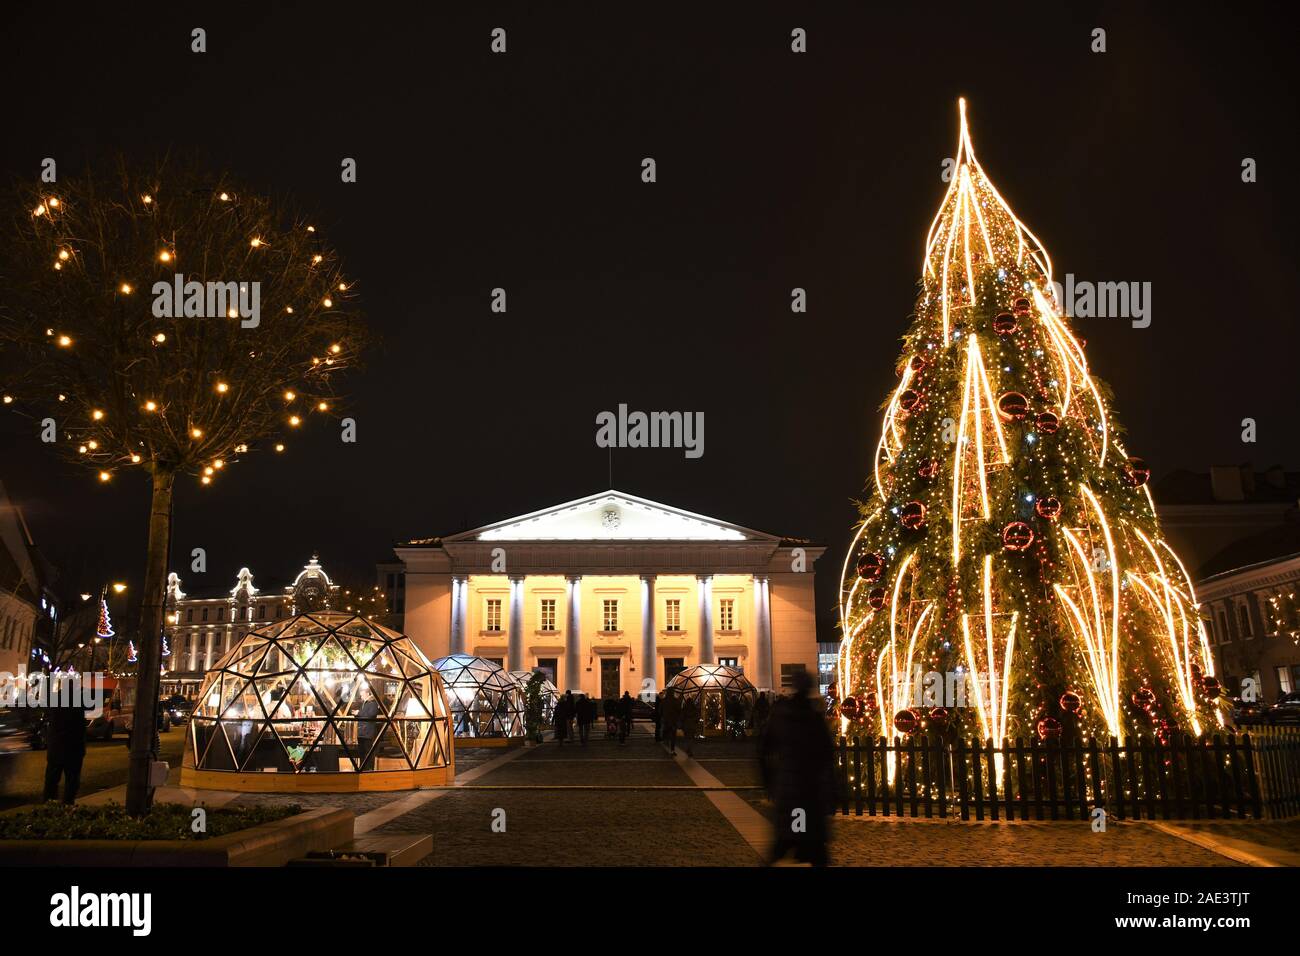 Vilniaus Rotuse High Resolution Stock Photography and Images - Alamy